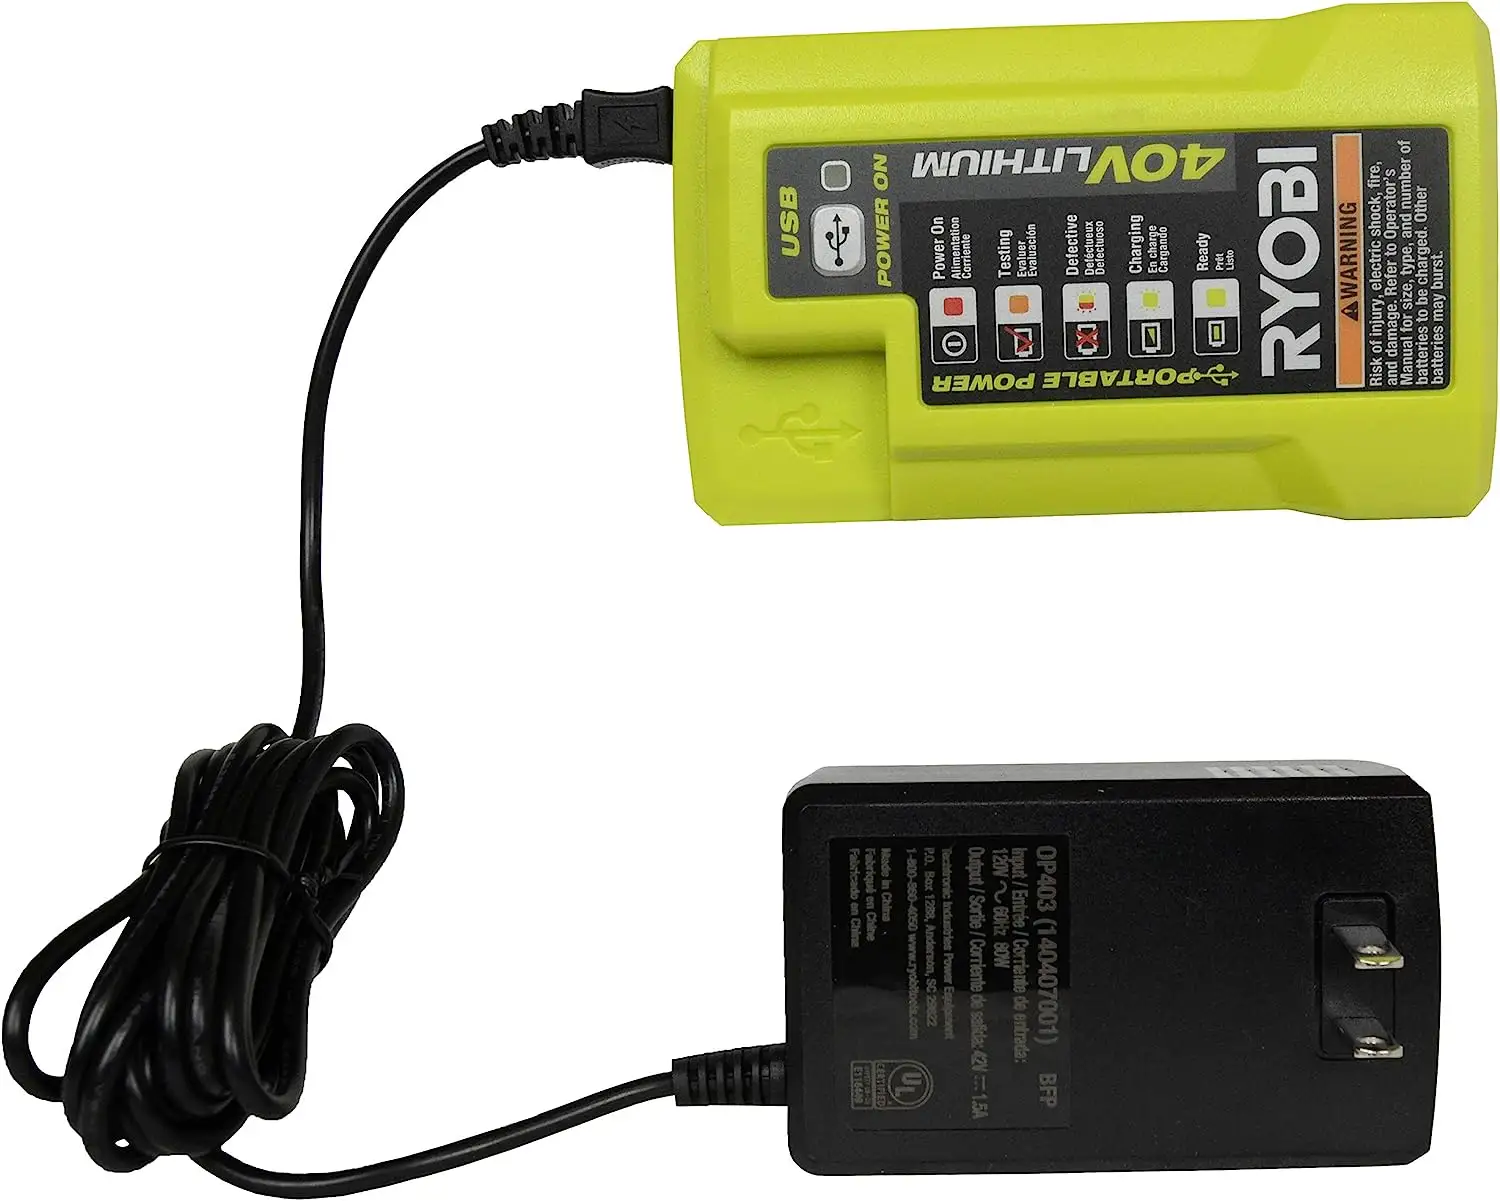 OP403 Adapter charger For Ryobi LUB40V Lithium-ion Battery Electric Tool Charger Overcharge Protection With USB And 3W Light